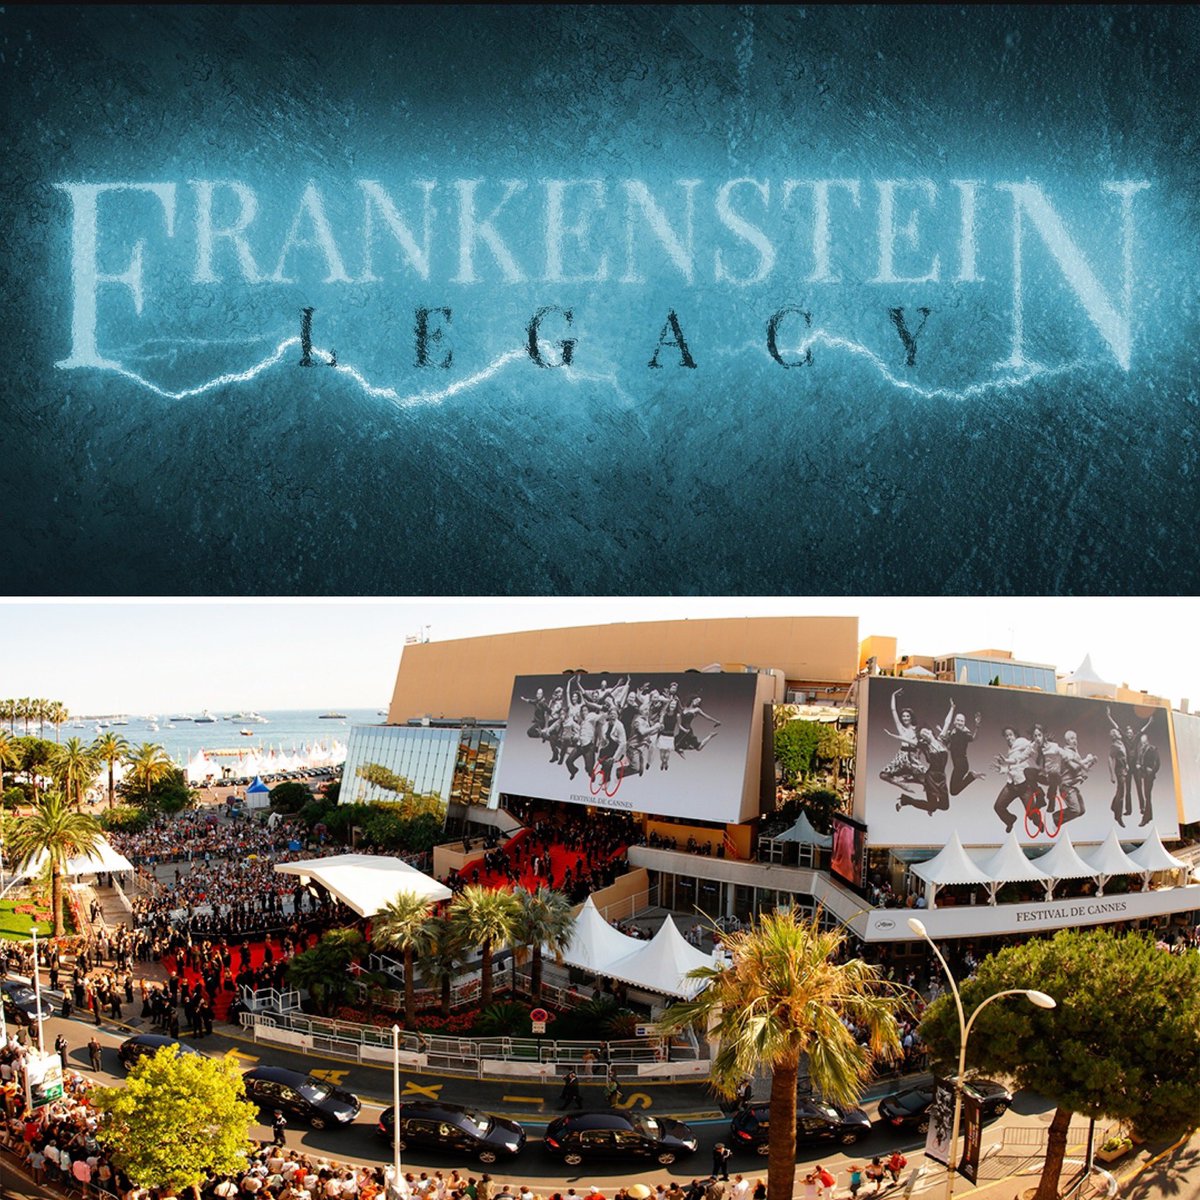 My new feature, ‘Frankenstein: Legacy’ is presented to potential buyers this week at the Cannes film festival. Fingers crossed for positive reactions & sales.🤞🏻
#frankenstein #cannes #mandmfilmproductions #hanoverpictures #101filmsinternational #CannesFilmFestival #Cannes2023